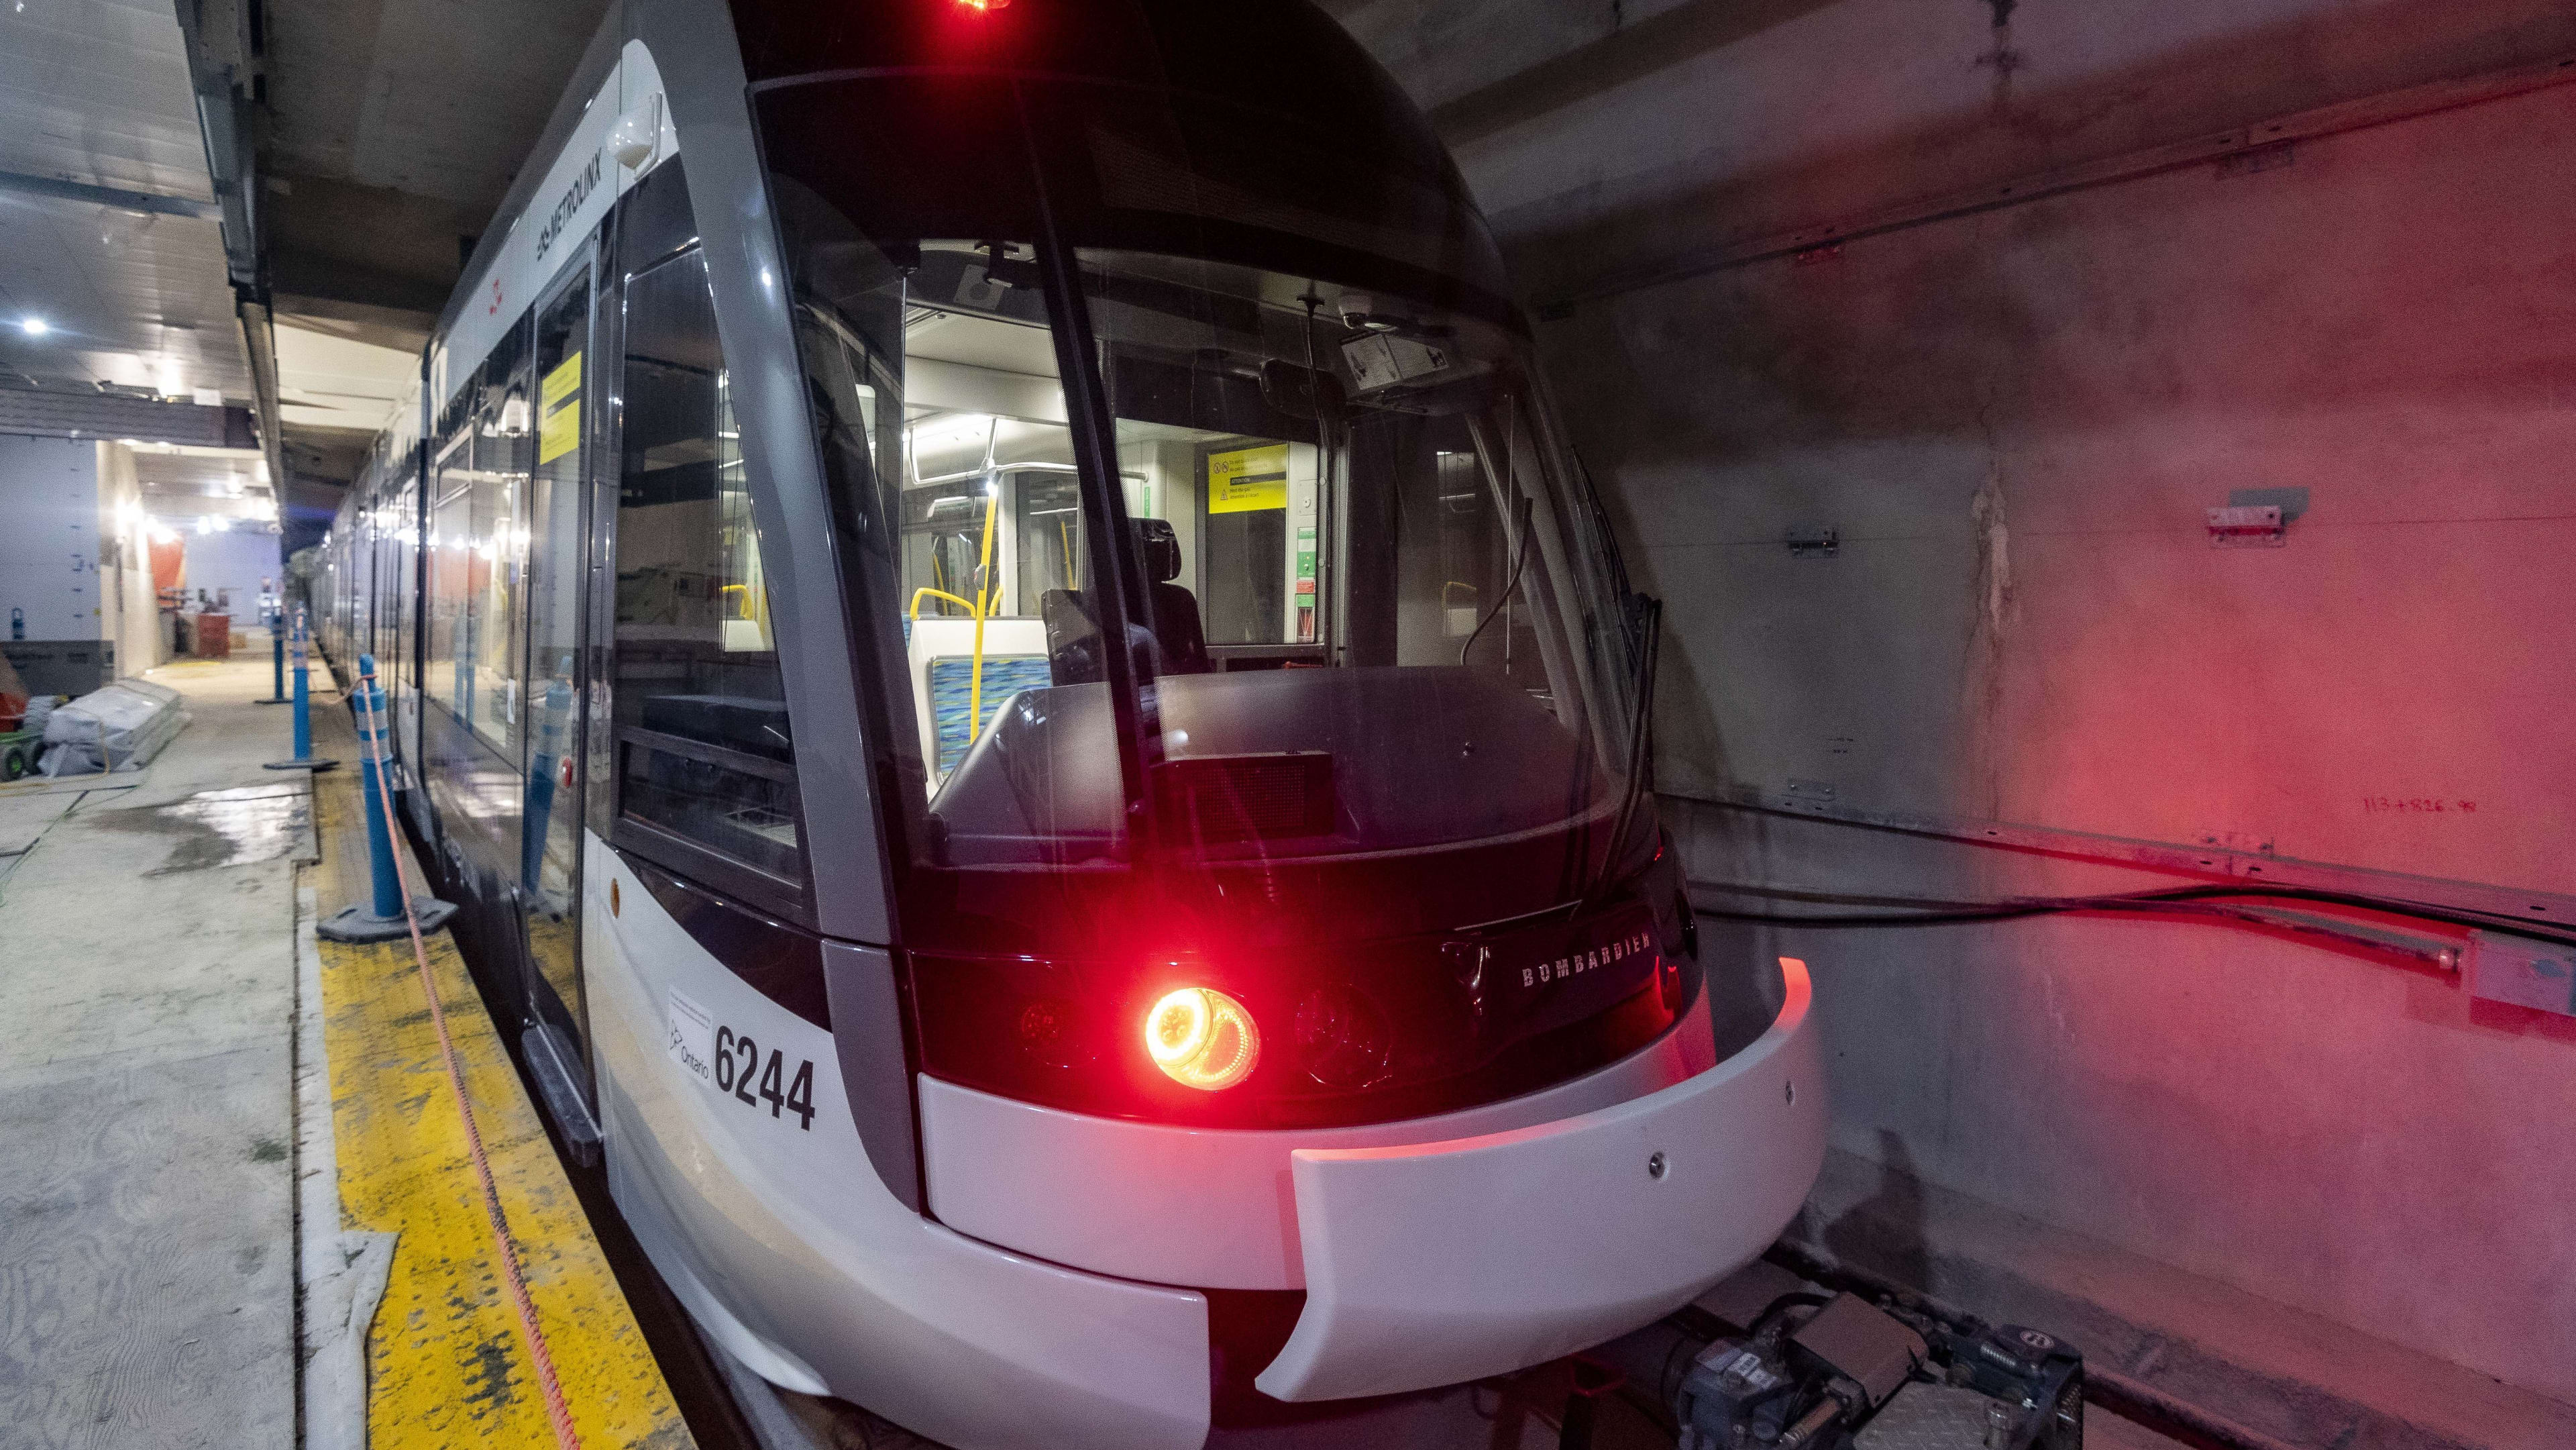 An Eglinton Crosstown LRT vehicle in one of the underground stations along the route during recen...